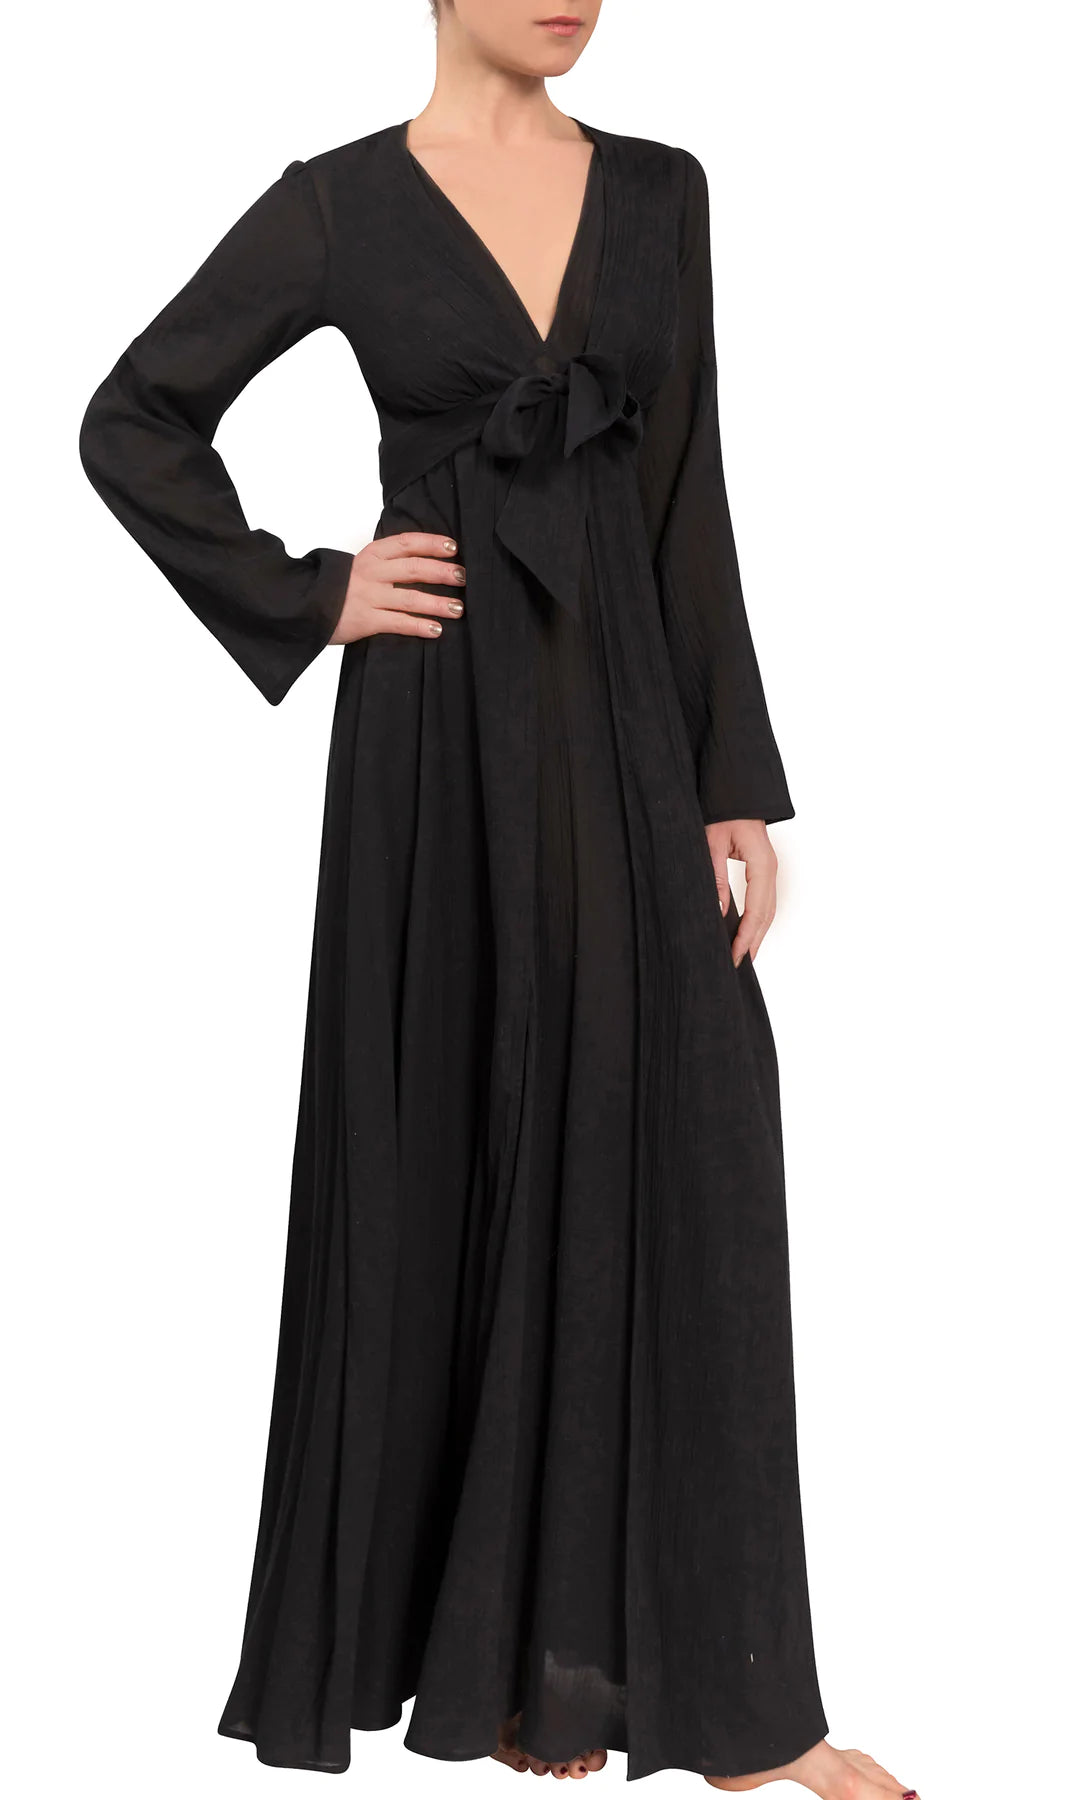 Diana Luxury Cotton Front Tie Duster Robe - S + L